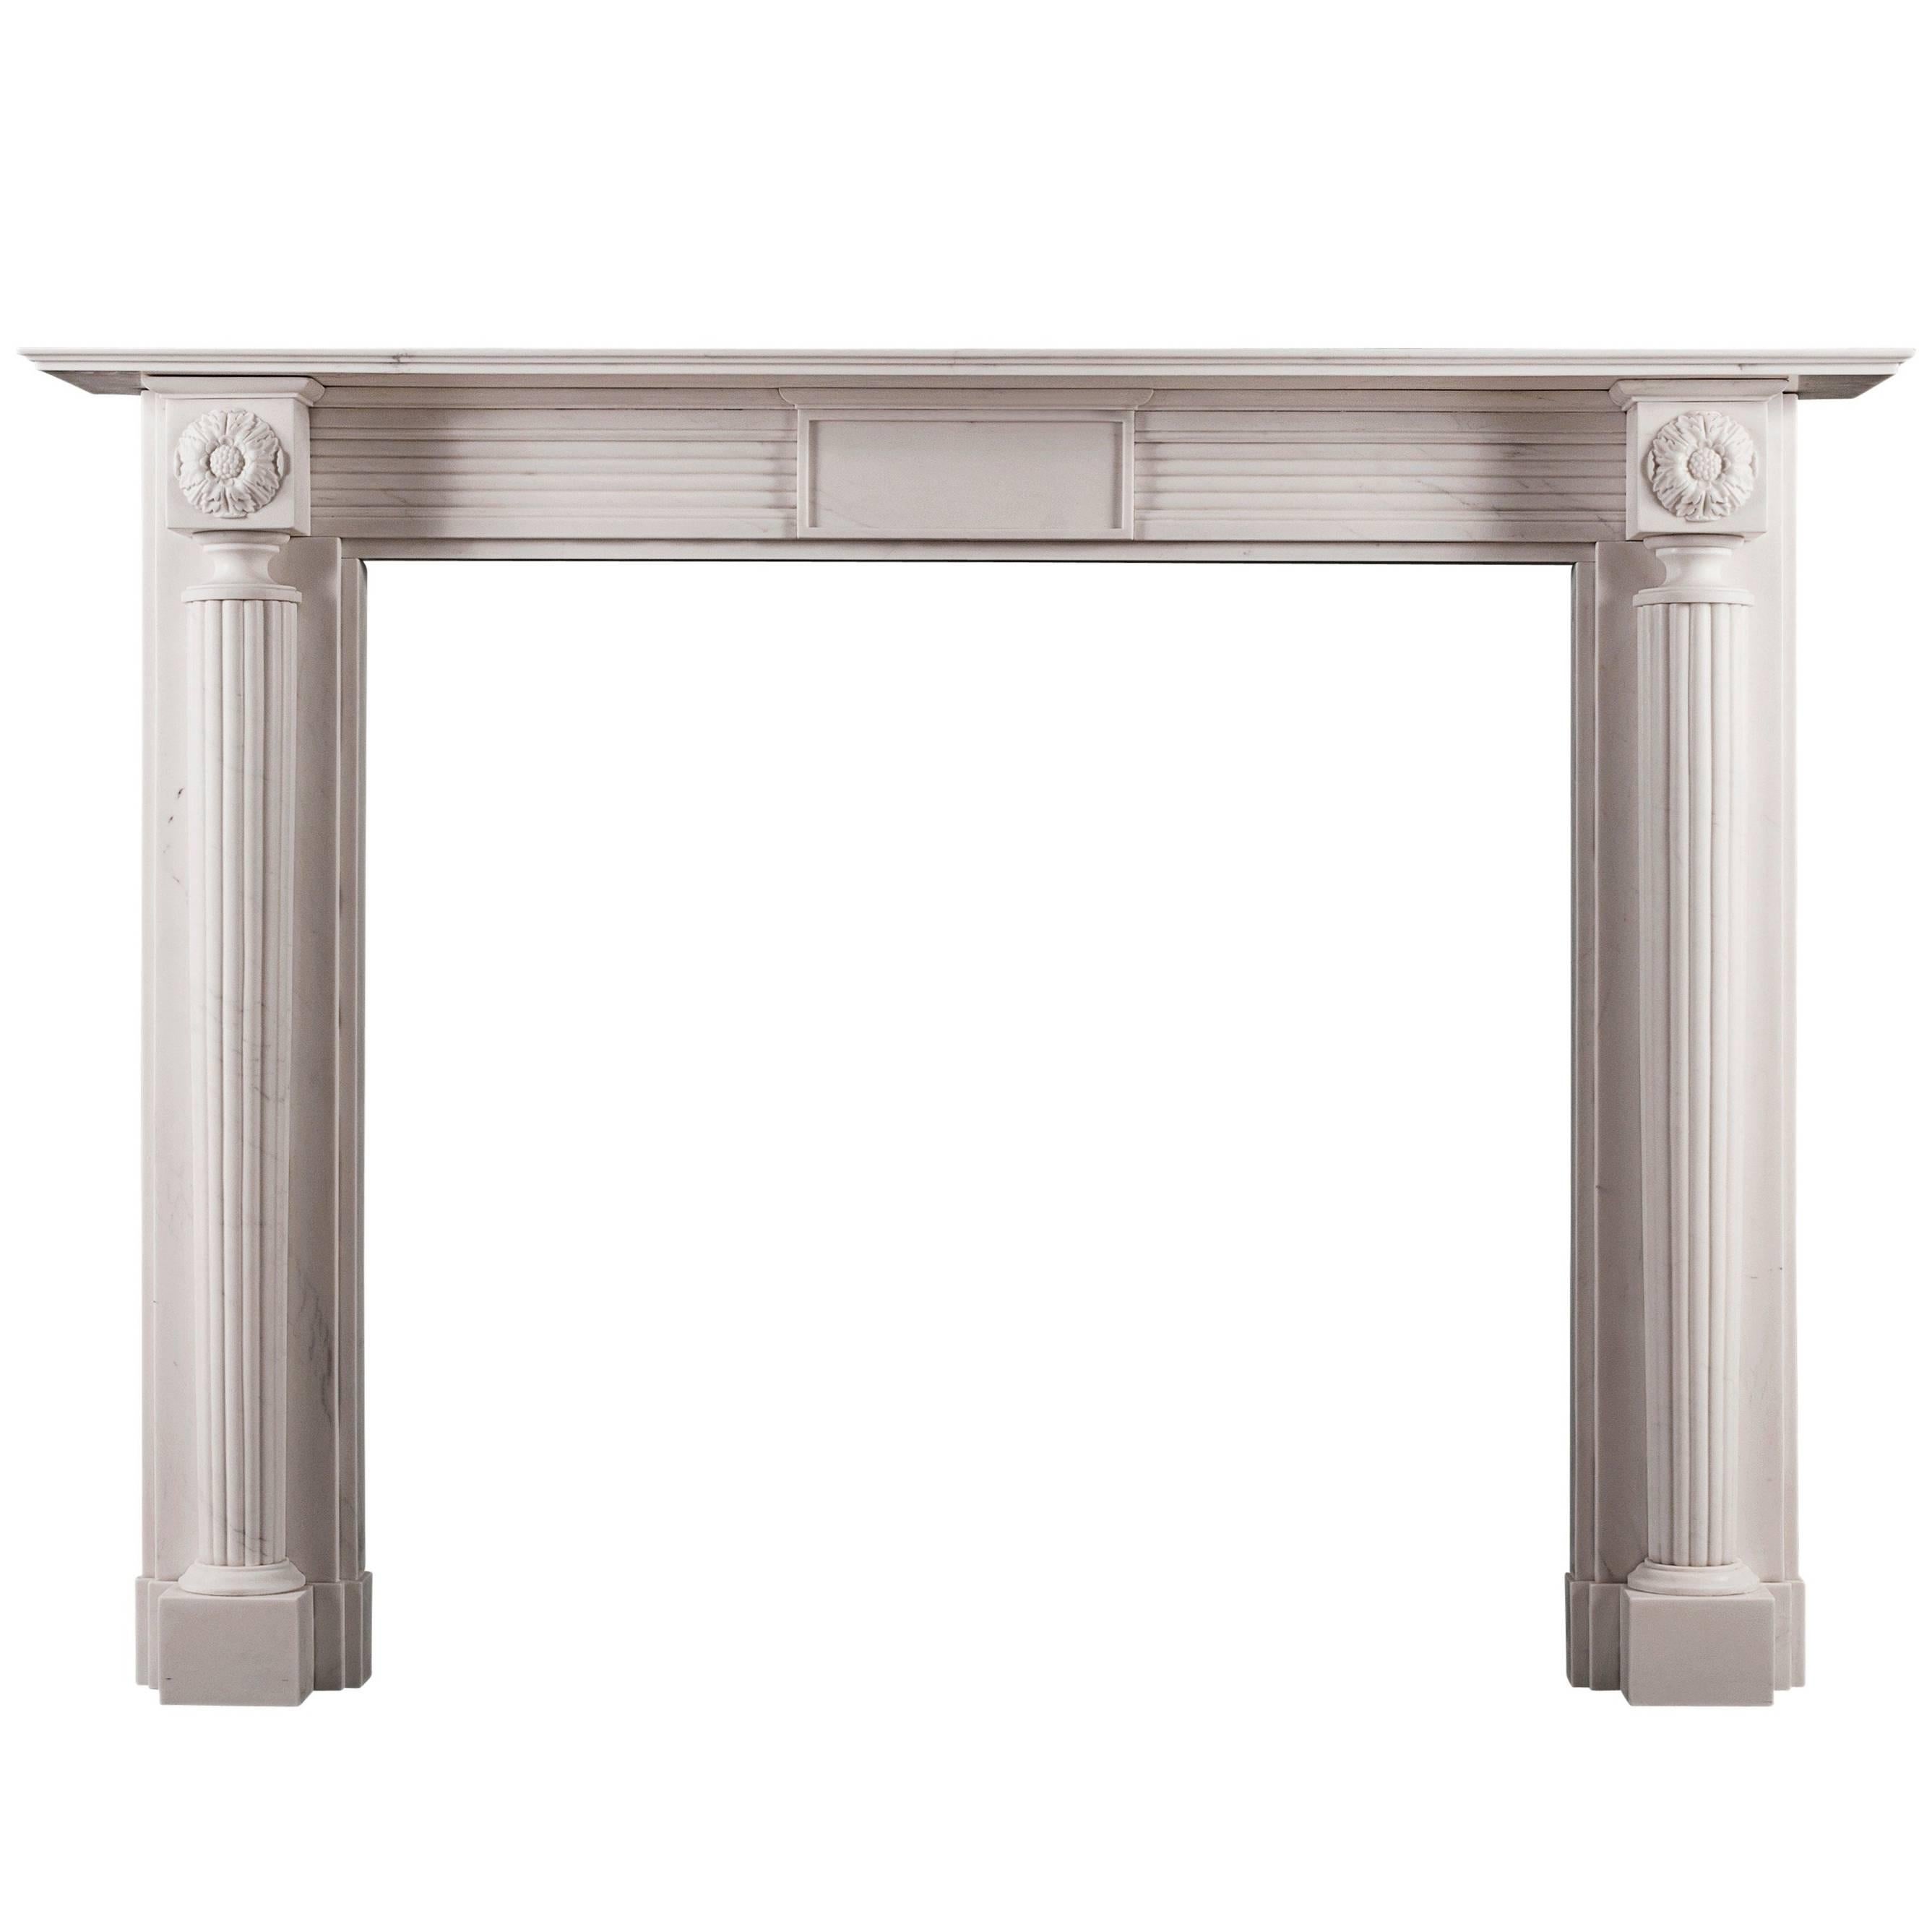 English Regency Style Fireplace in White Marble For Sale